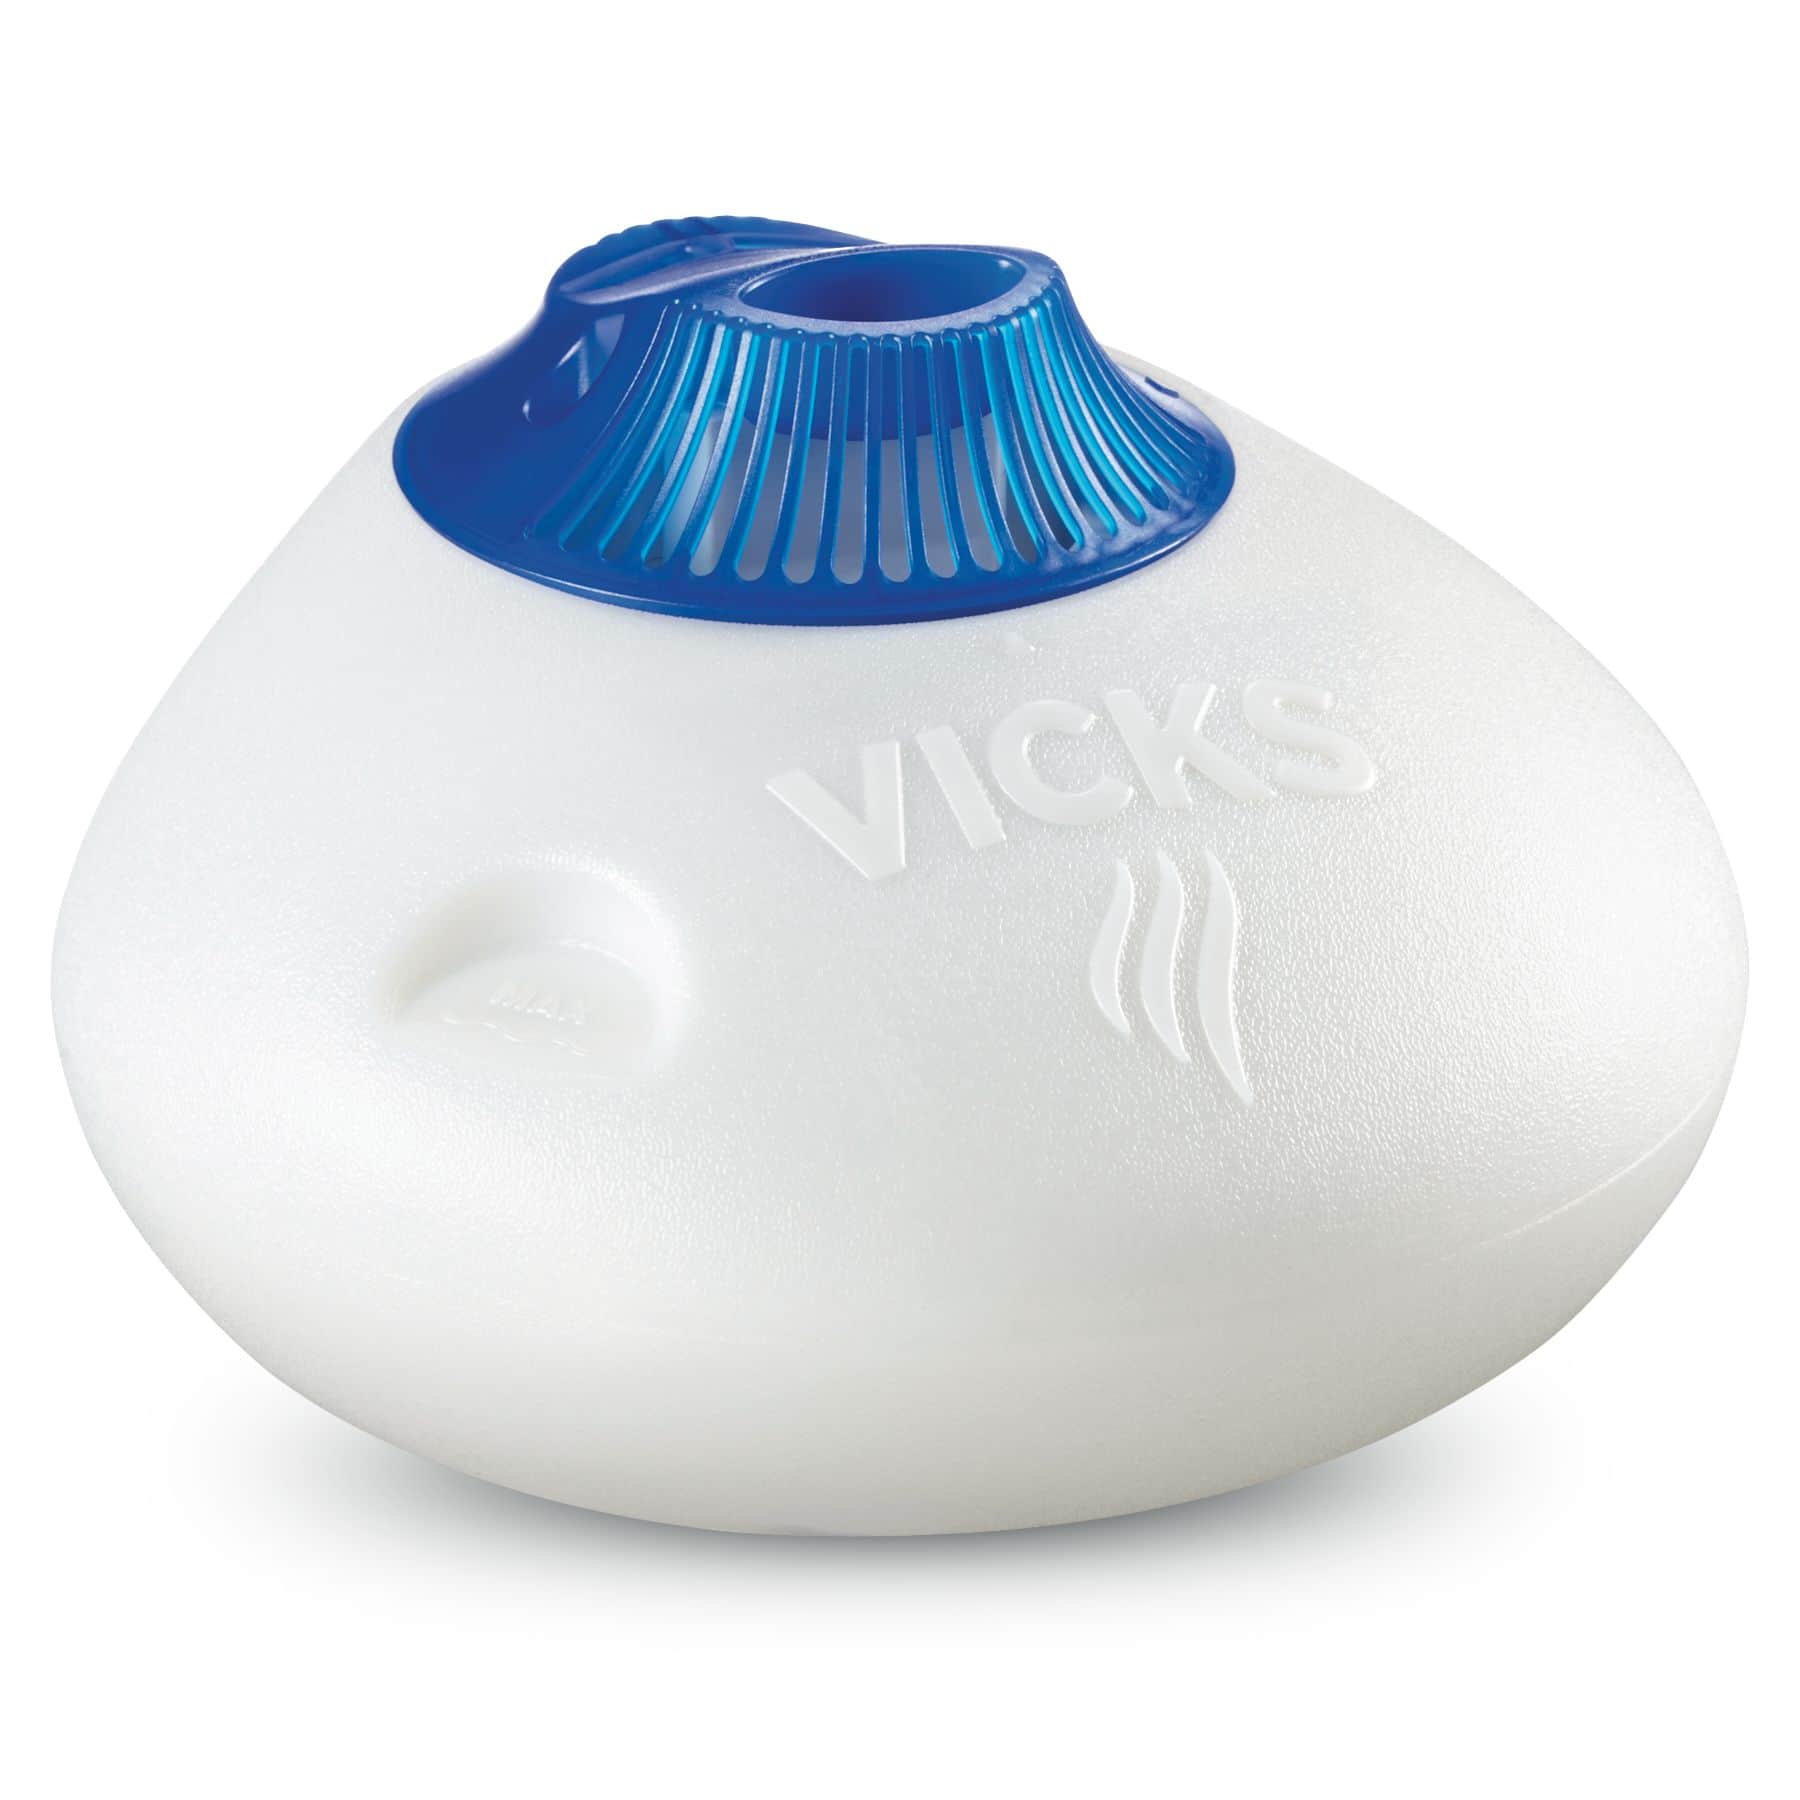 Vicks V150SGNLC Vaporizer Pure Steam Warm Mist Air Humidifier with  Night-Light, White/Blue, 5.68-L